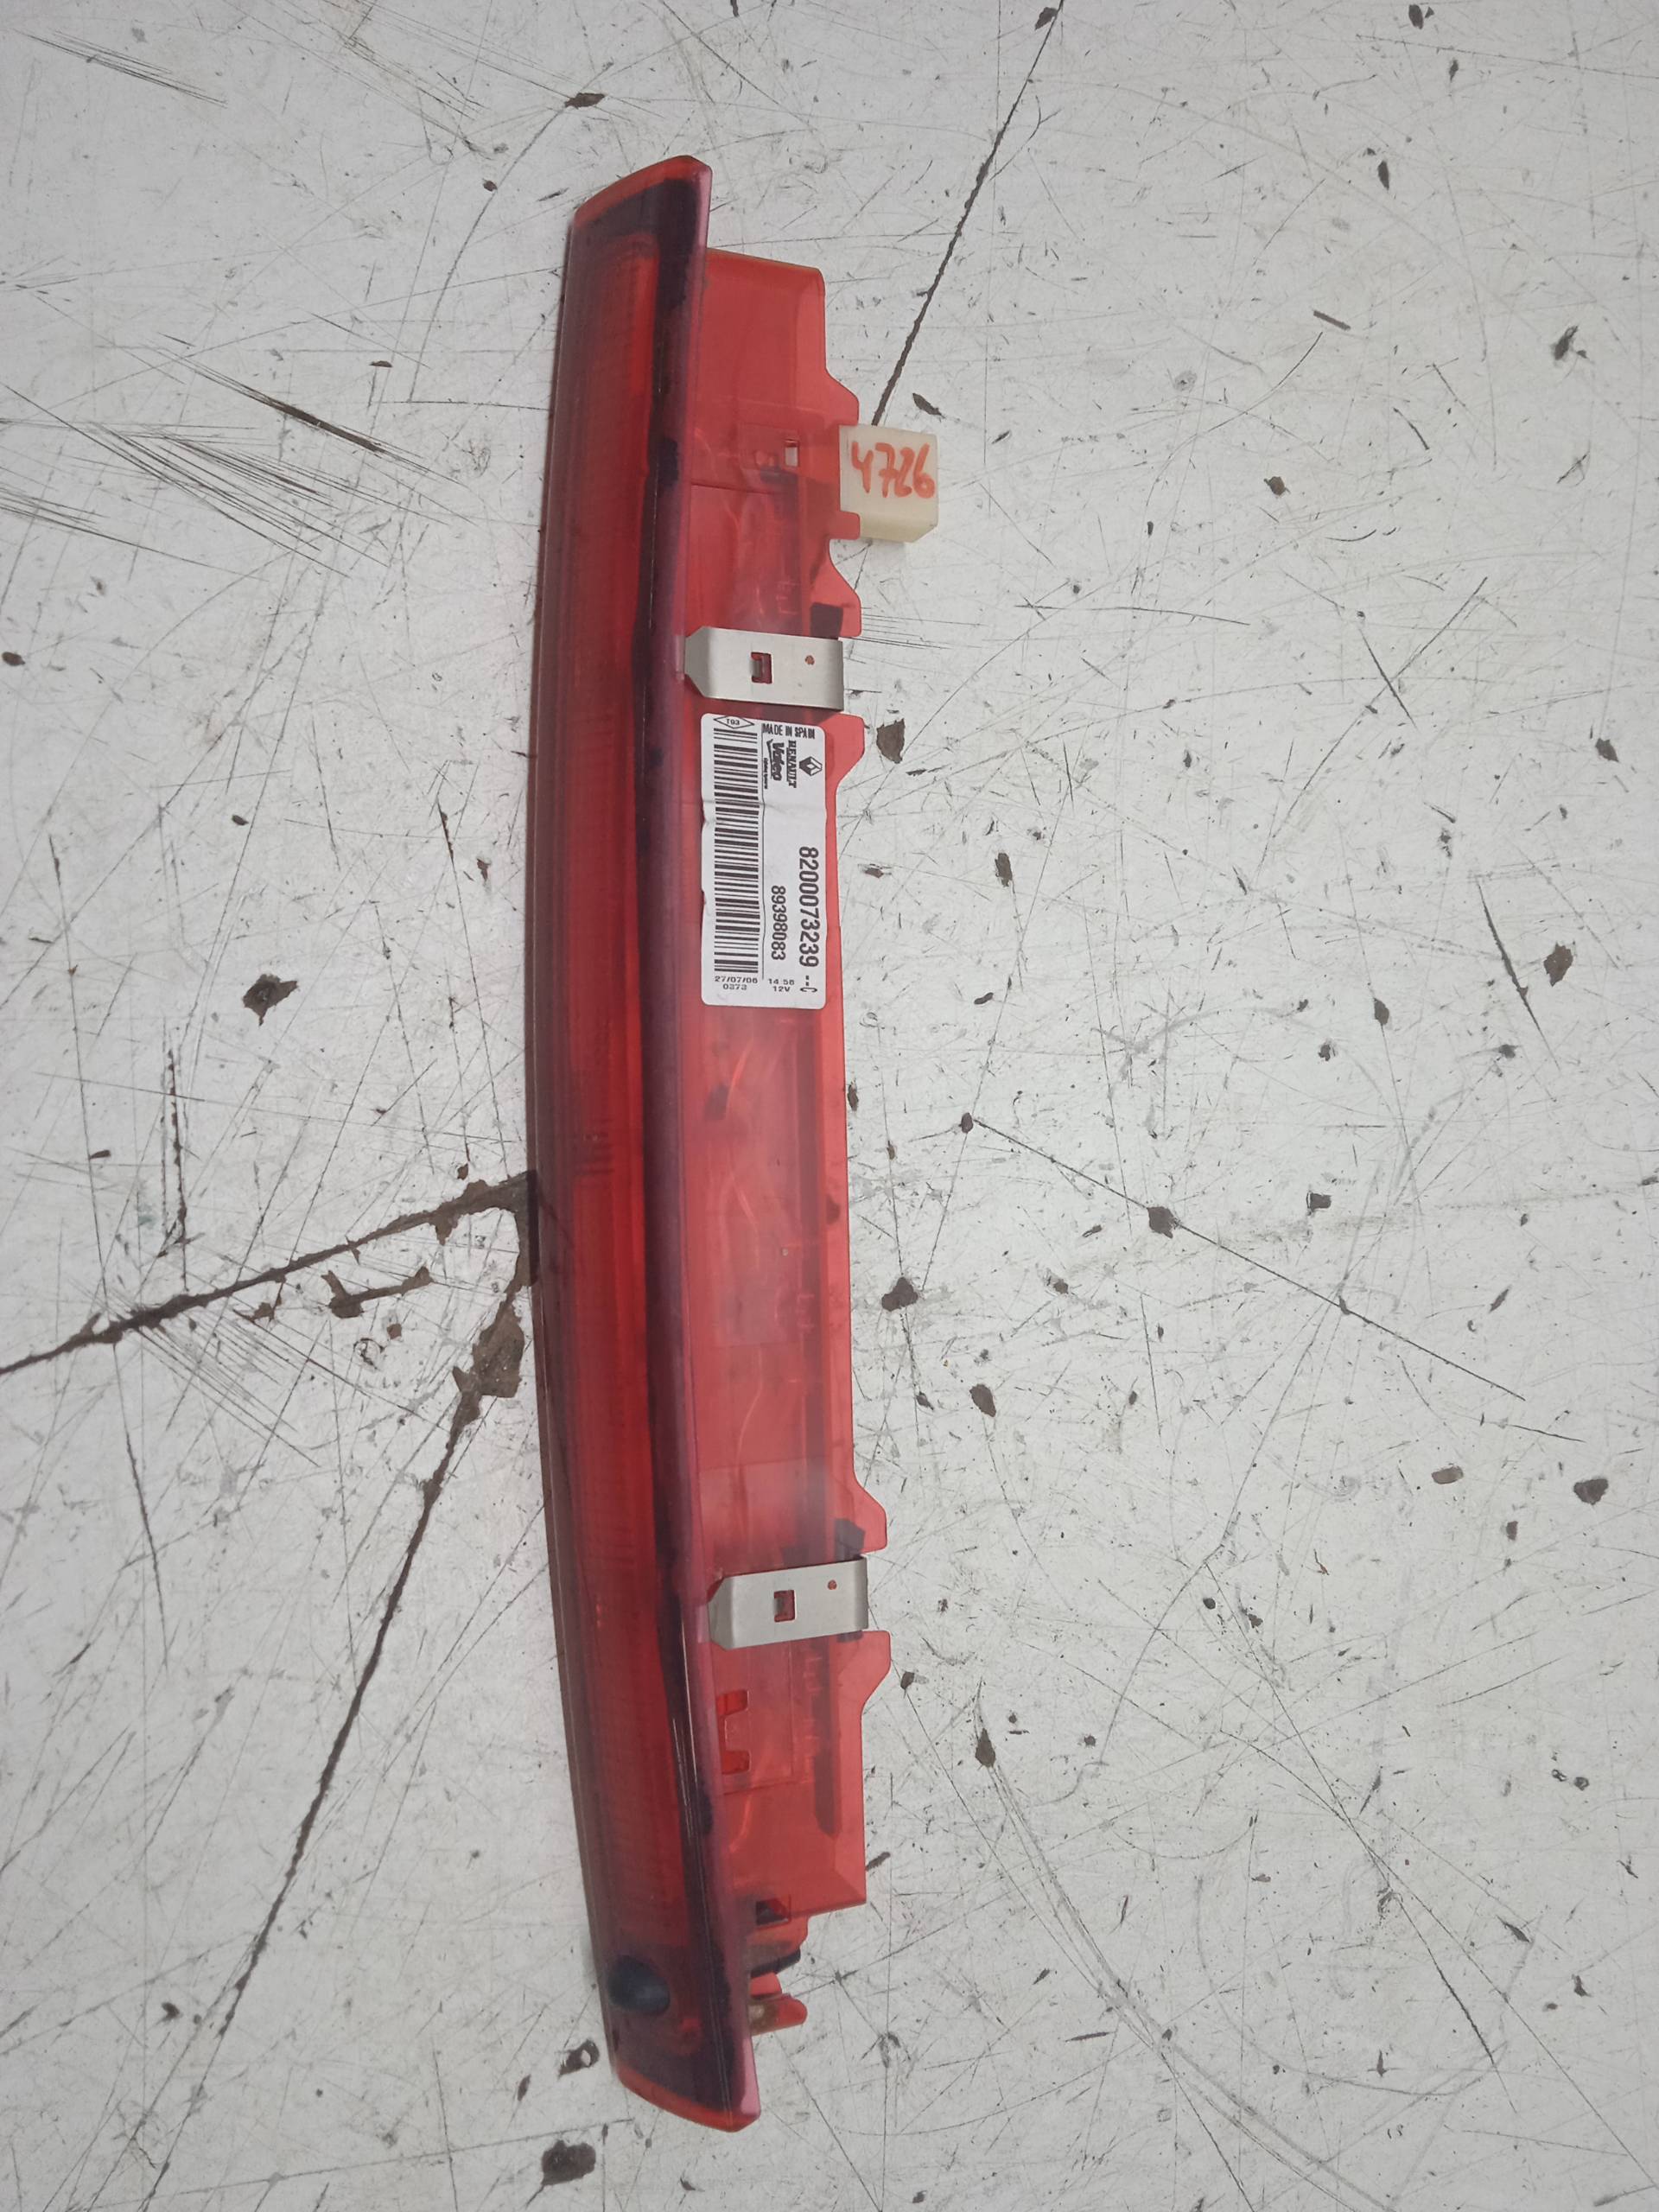 RENAULT Scenic 2 generation (2003-2010) Rear cover light 8200073239C 24334535